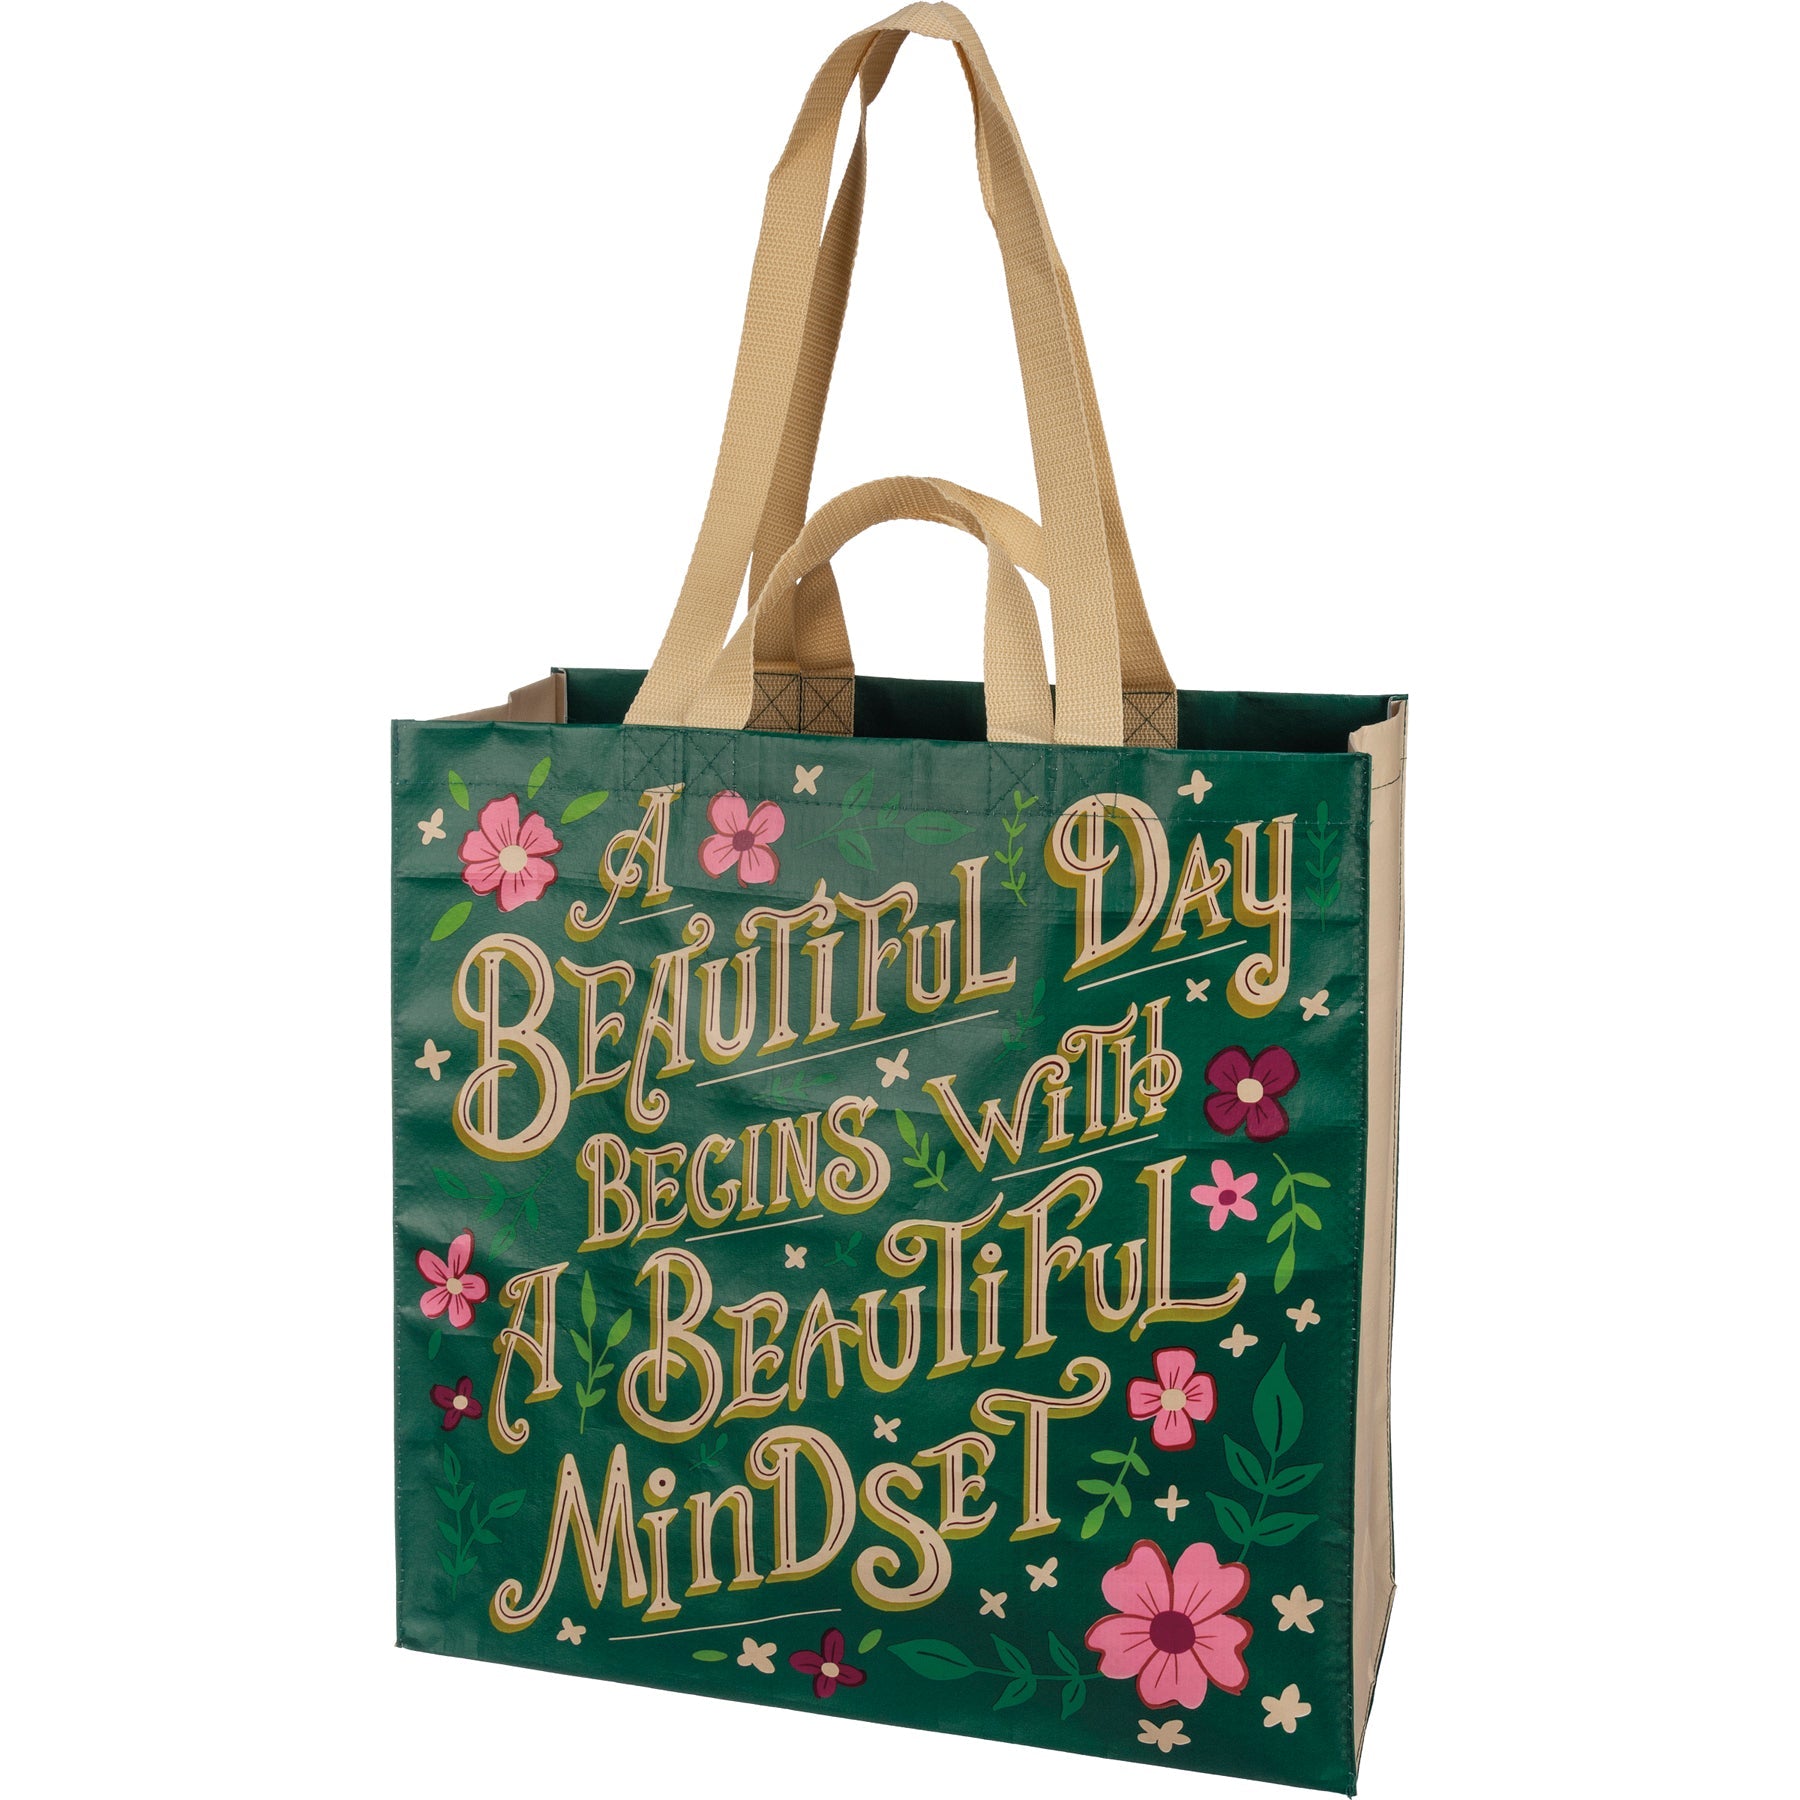 A Beautiful Day Begins With A Beautiful Mindset Floral Market Tote Bag